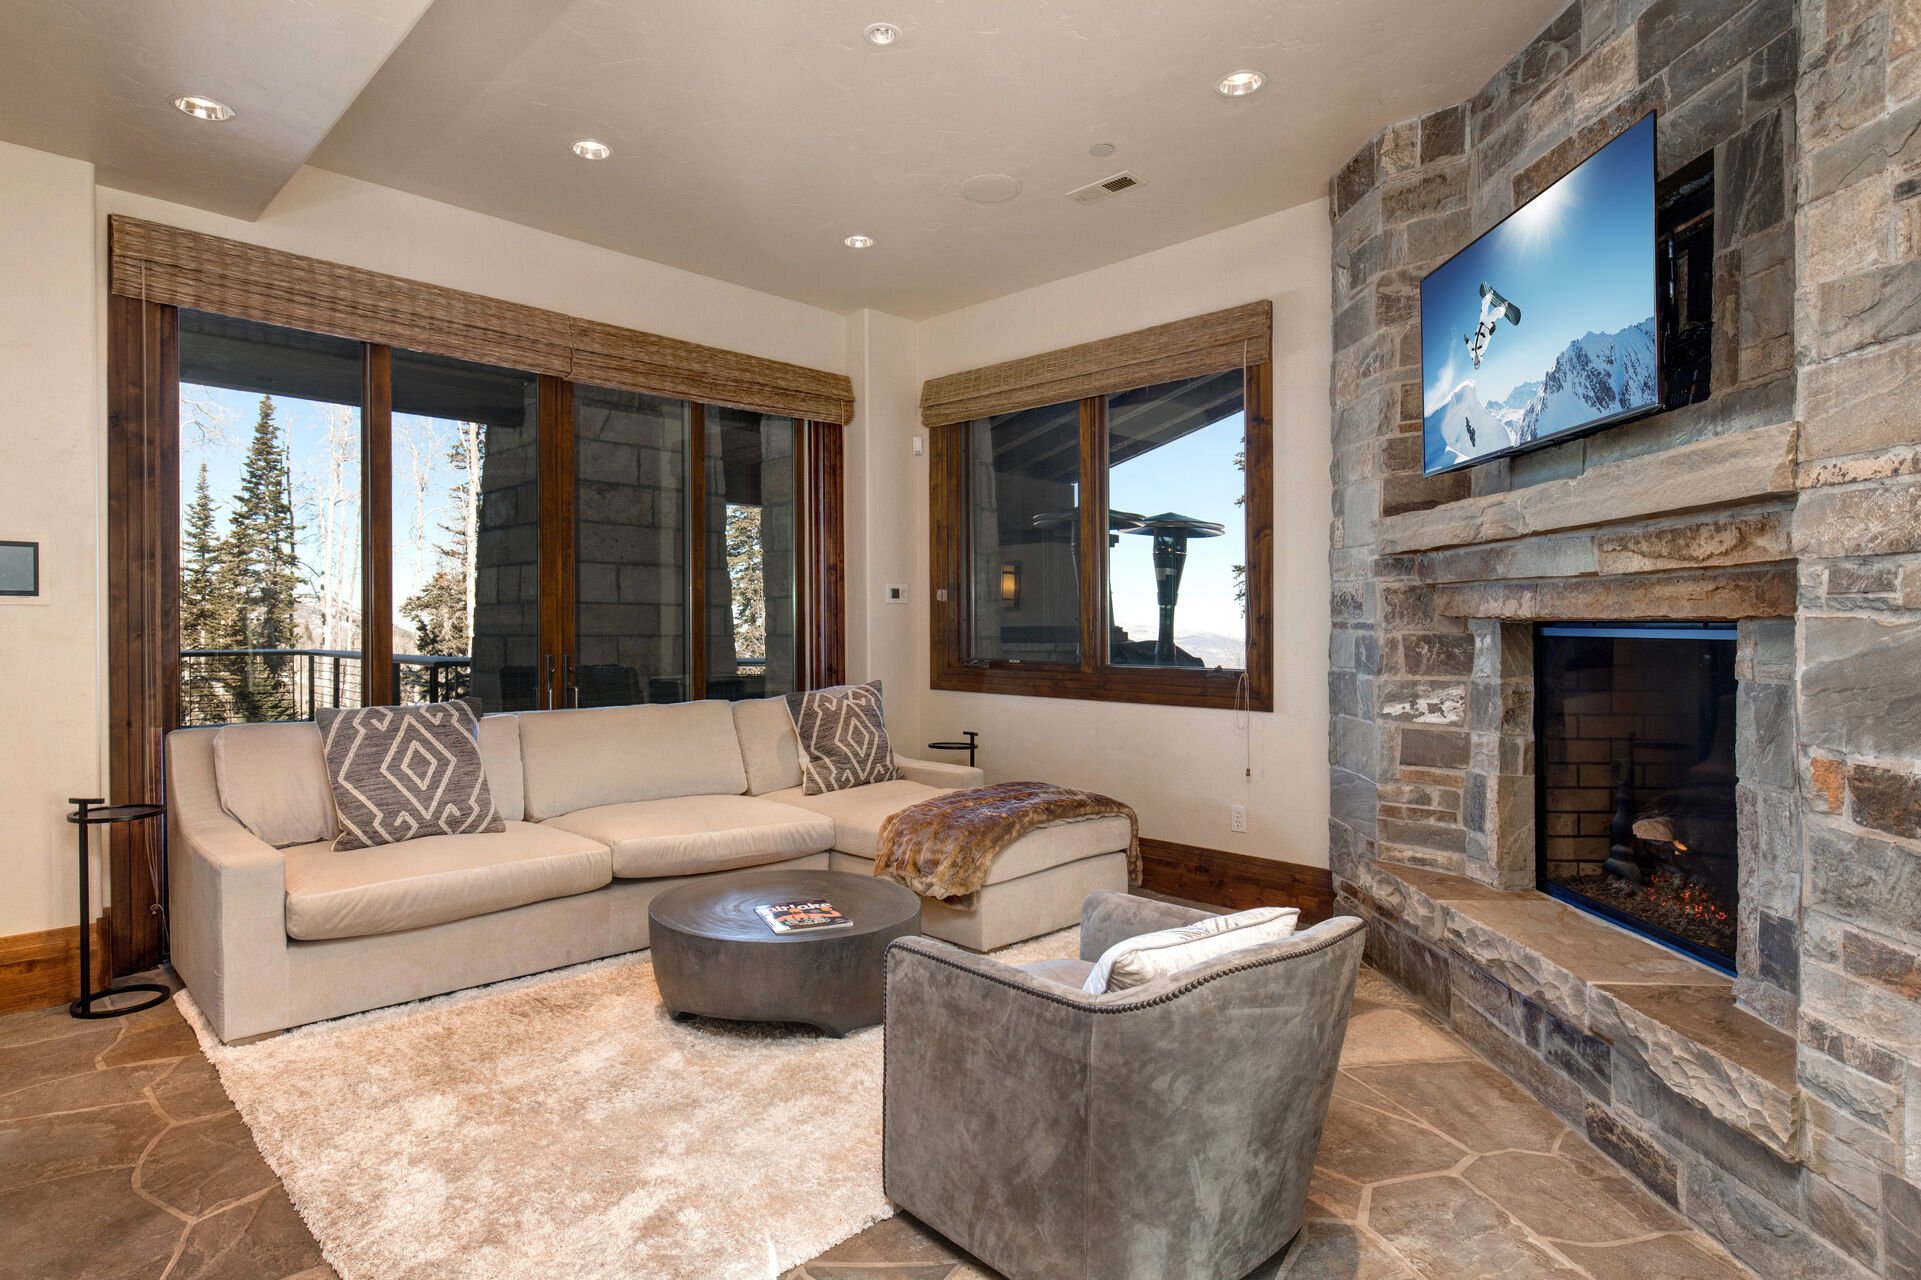 Enter this sprawling home through the garage and into the ski locker and lounge area with 6 ski lockers, hot tub patio access, gas fireplace, sectional sofa and 55